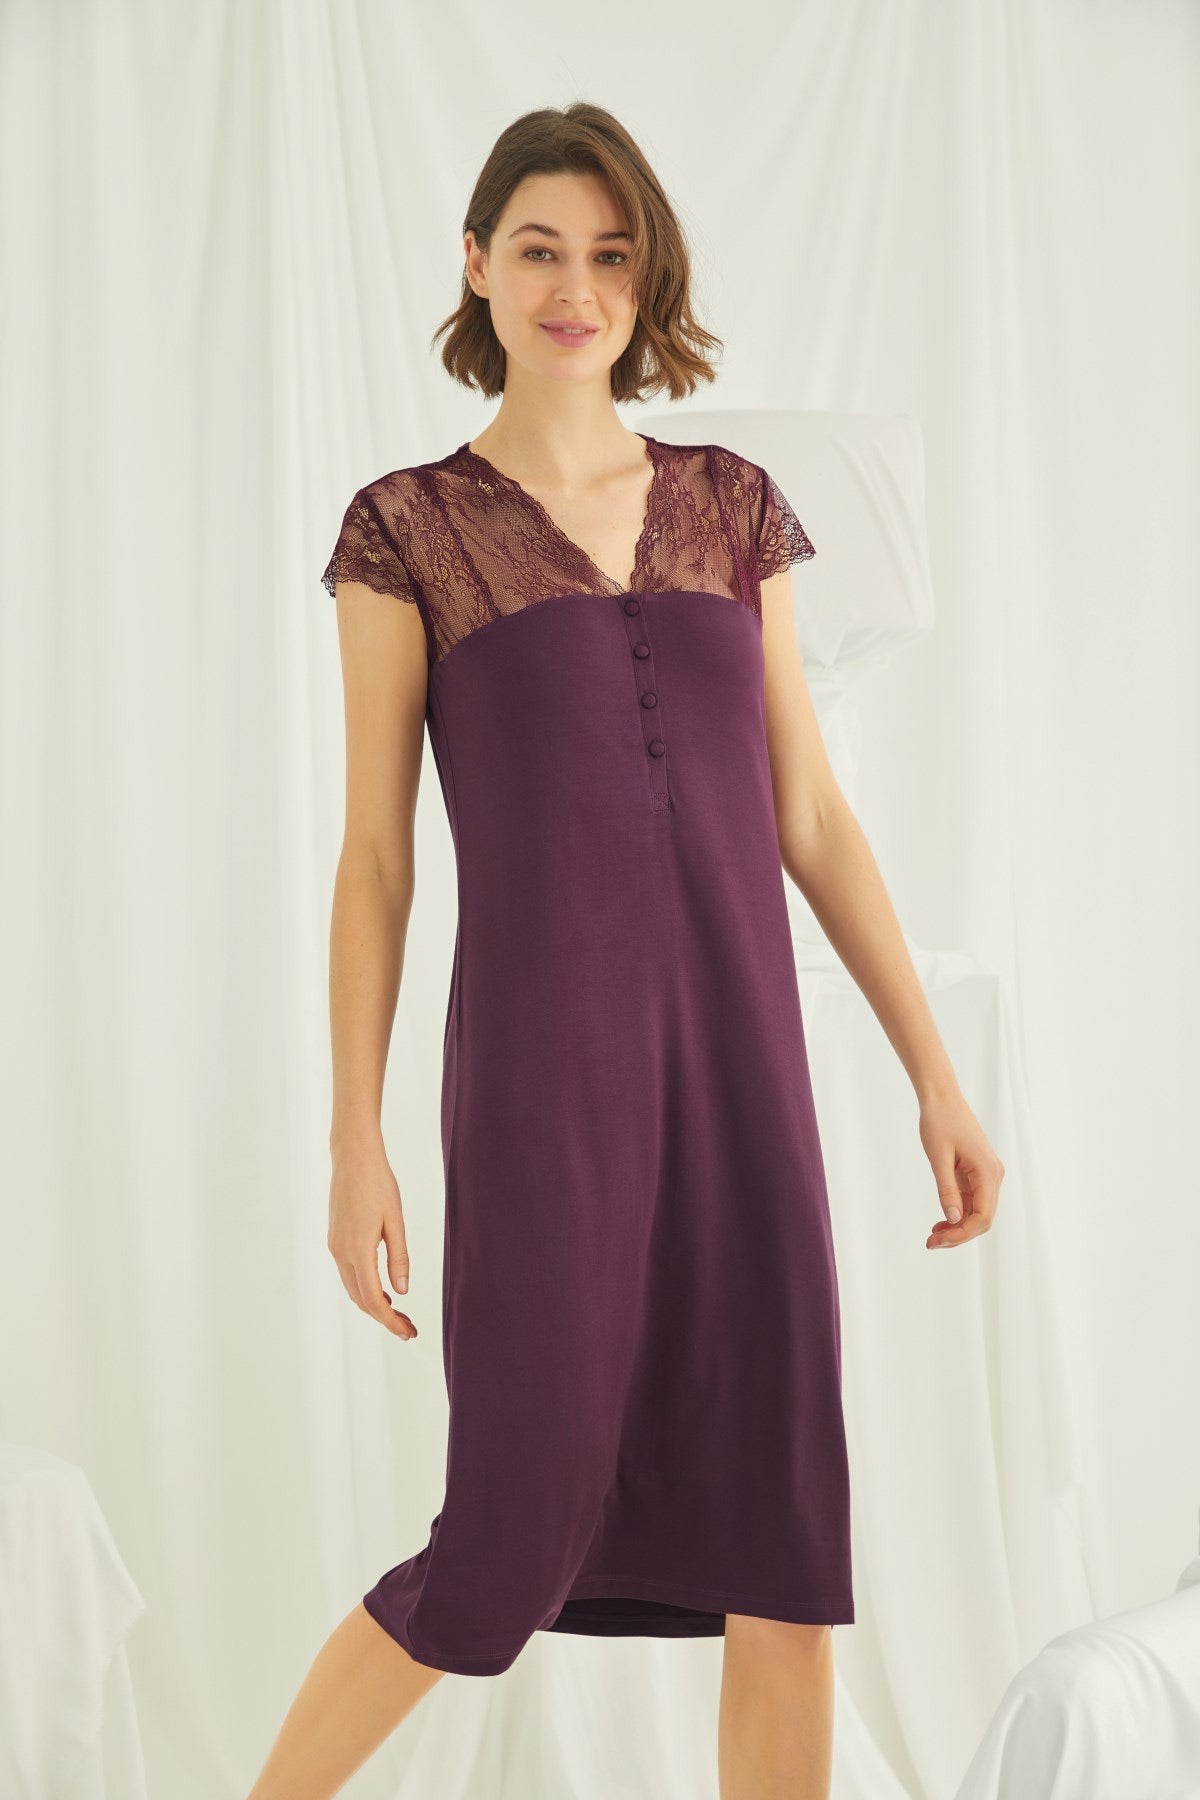 Lace V-Neck Plus Size Maternity & Nursing Nightgown Claret Red - 18458